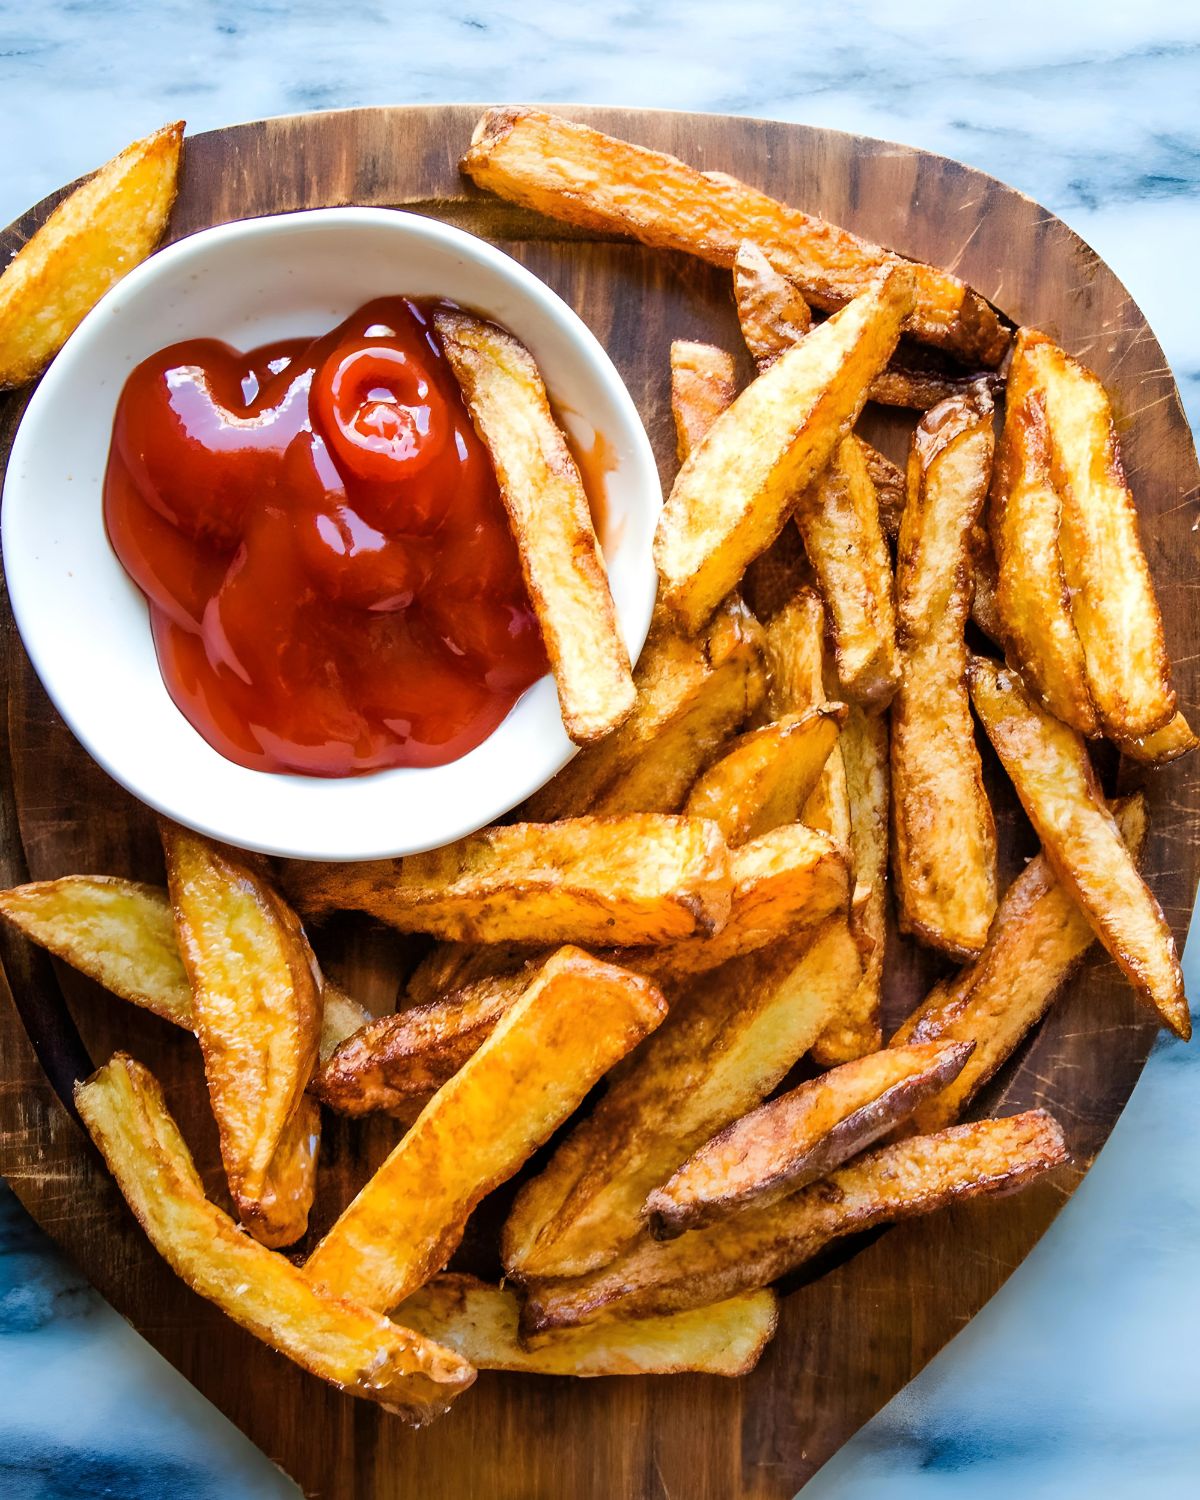 Homemade French fries with ketchup.